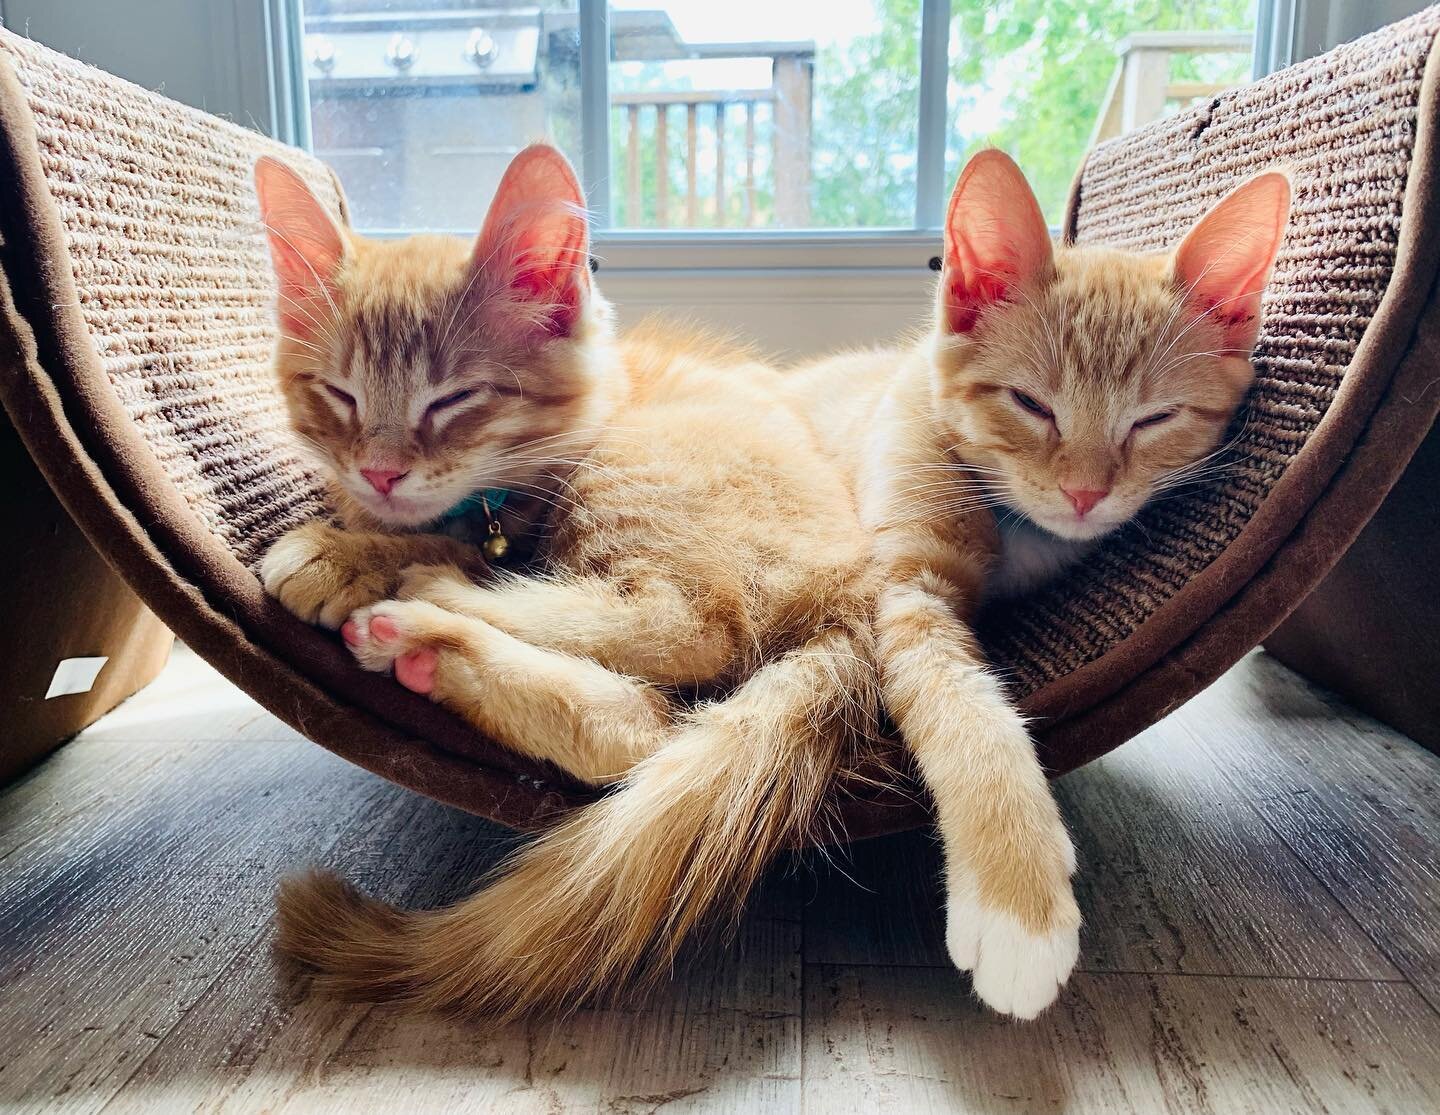 Lazy Sunday feels with Sully &amp; Ollie 😻 #catsofinstagram #catstagram #kittensofinstagram #catlife